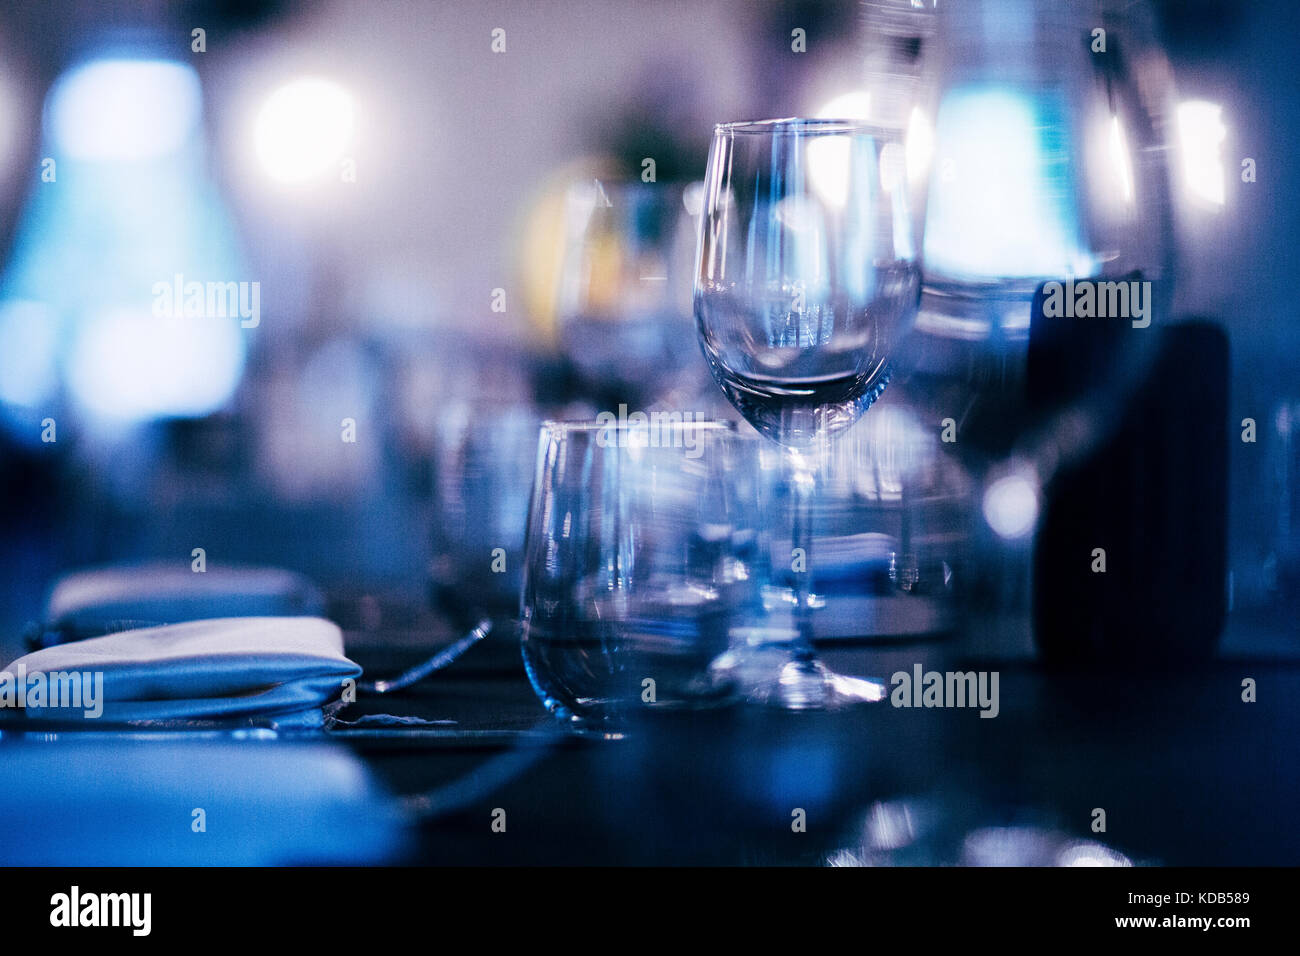 Luxury table settings for fine dining with and glassware, beautiful blurred  background. Preparation for holiday  Christmas and Hannukah dinner night. Stock Photo